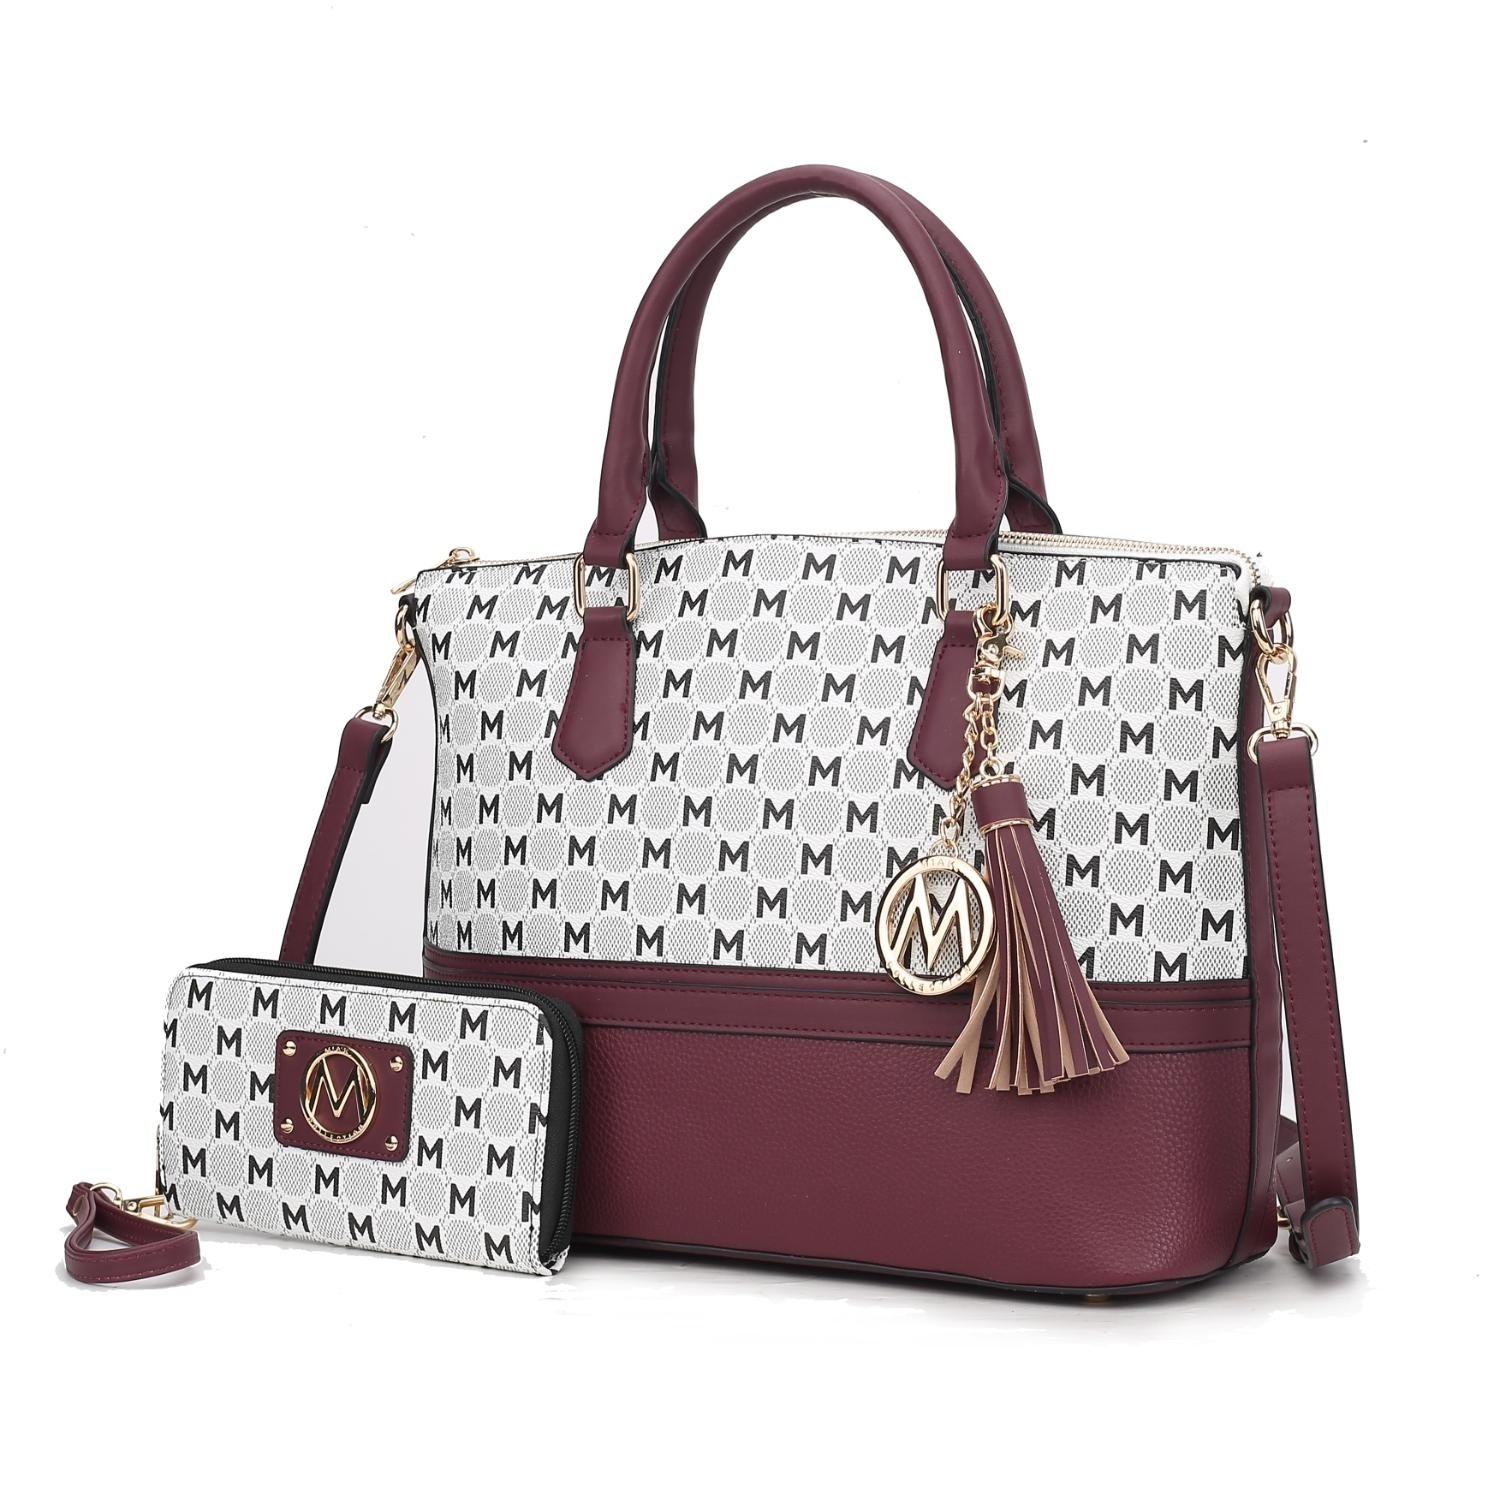 MKF Collection Saylor Circular M Emblem Print Women's Tote Bag With Matching Wristlet Wallet 2 Pieces By Mia K - Burgundy